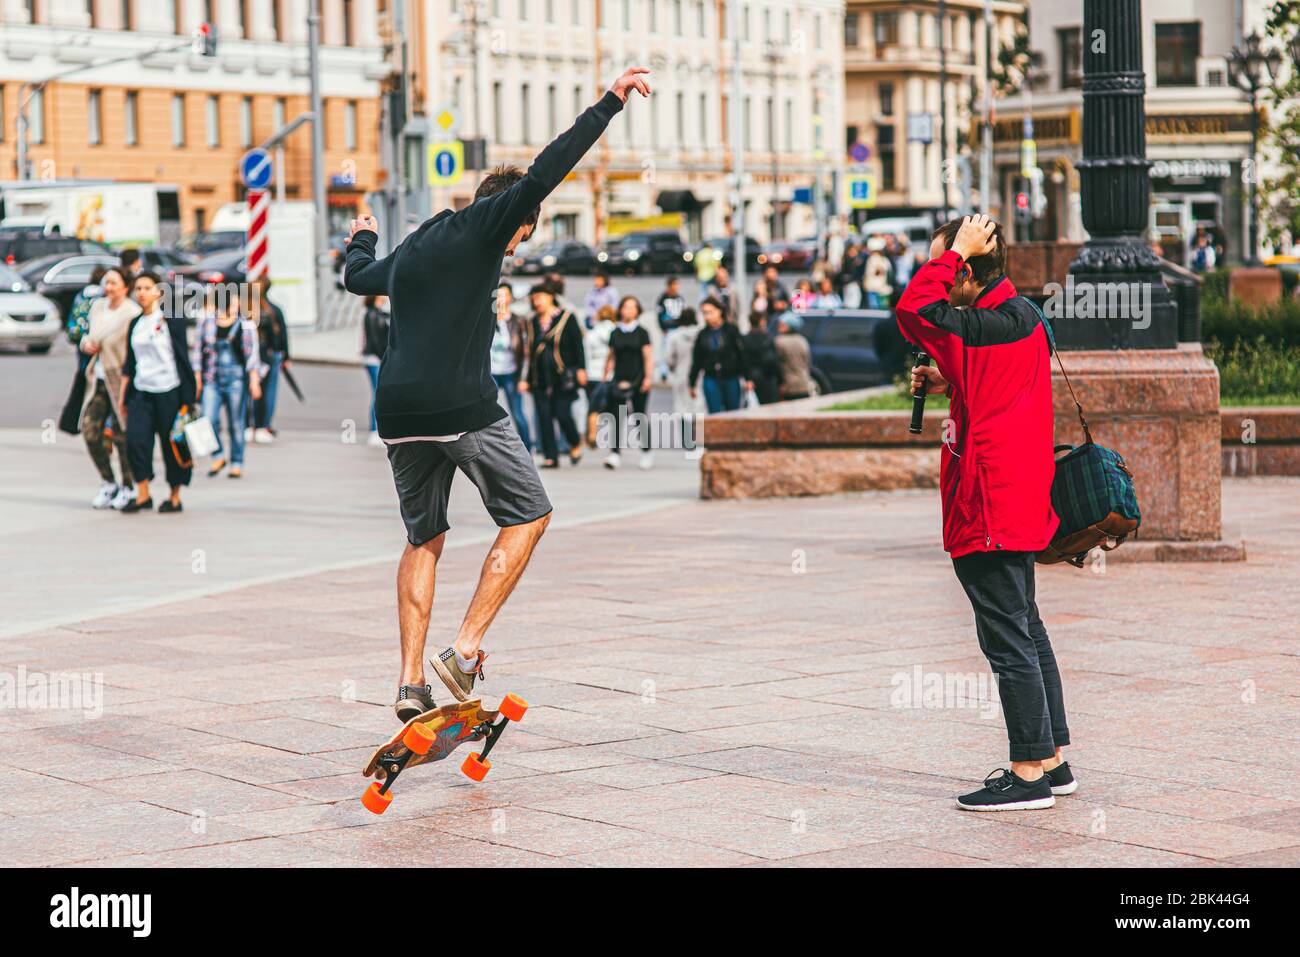 Moscow, Russia - JULY 7, 2017: young skateboarder in shorts doing a jumping trick against a crowd crossing a road Stock Photo